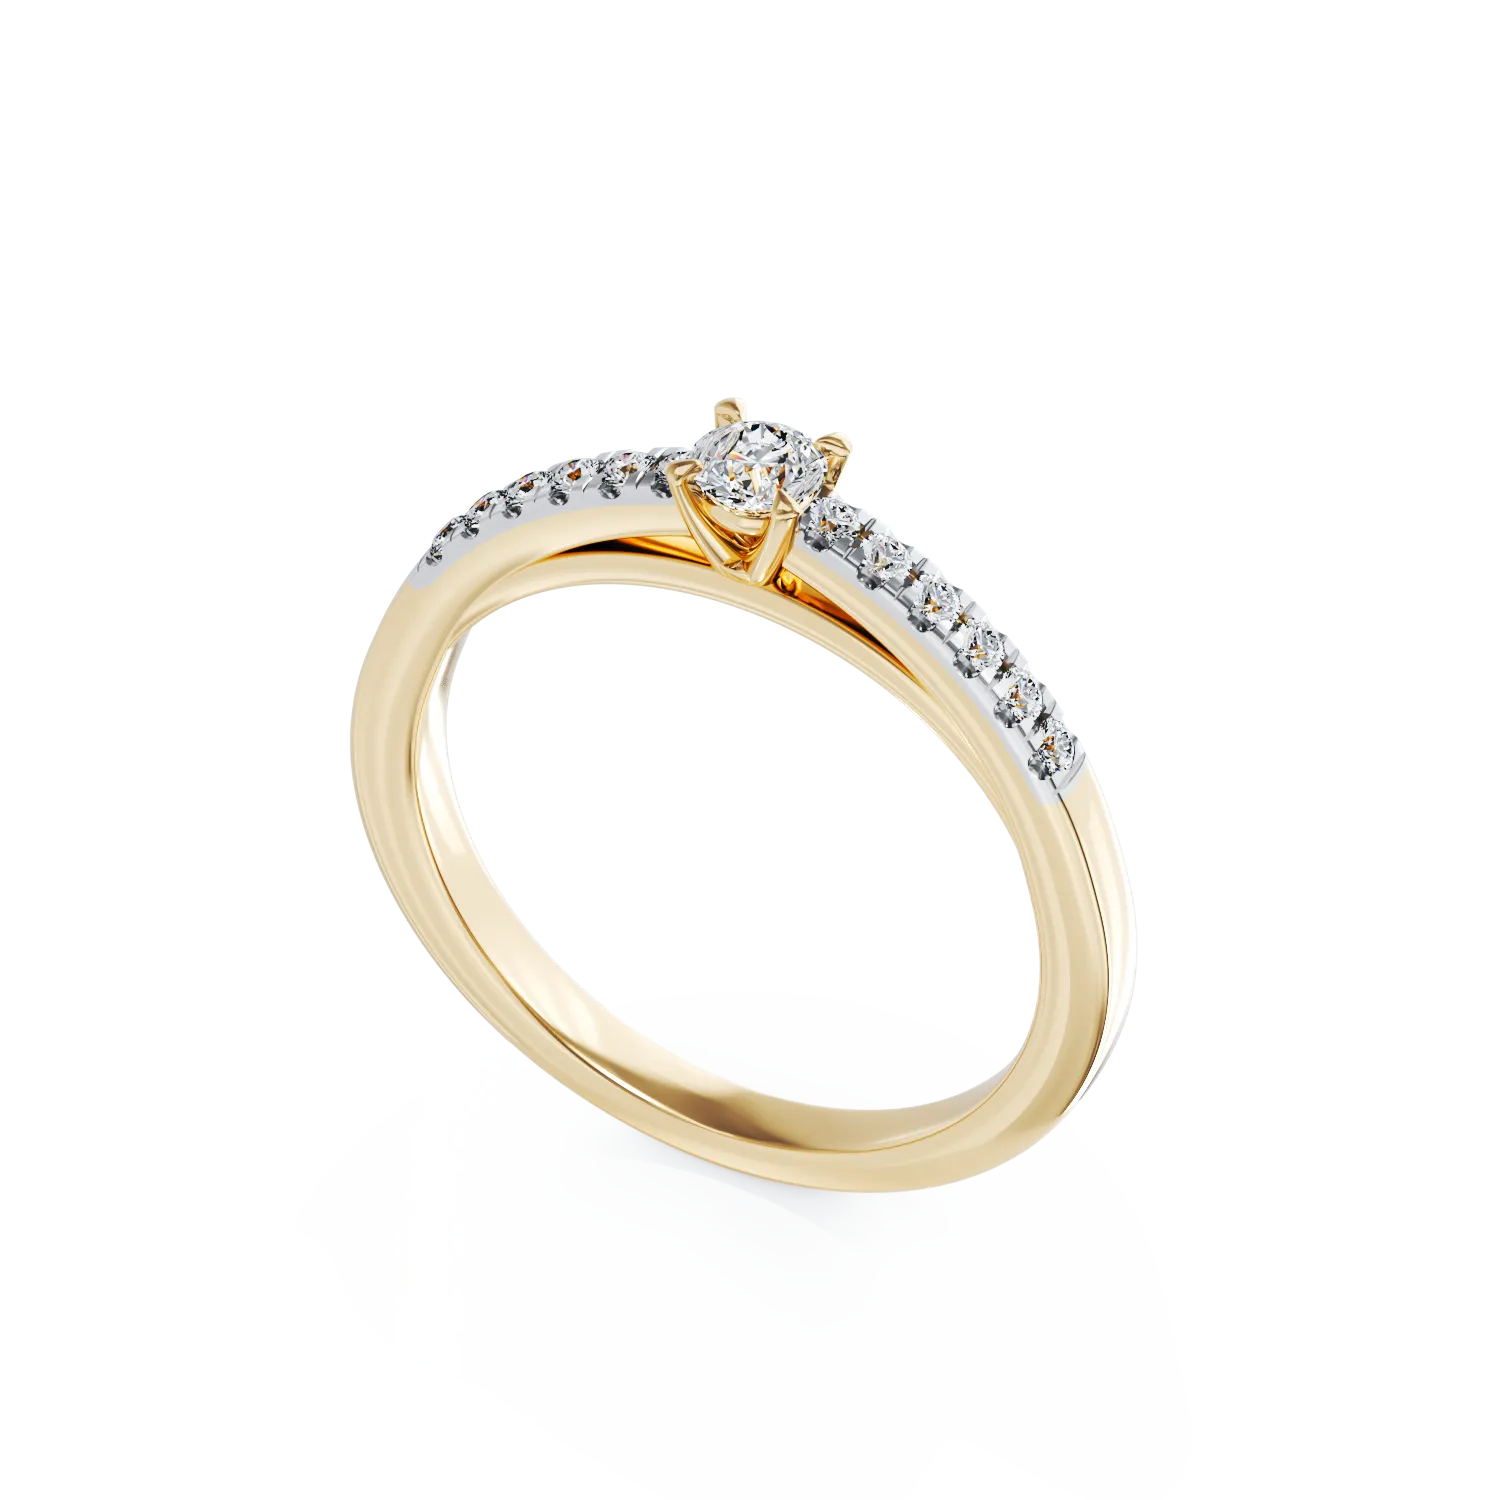 18K yellow gold engagement ring with 0.25ct diamond and 0.13ct diamonds